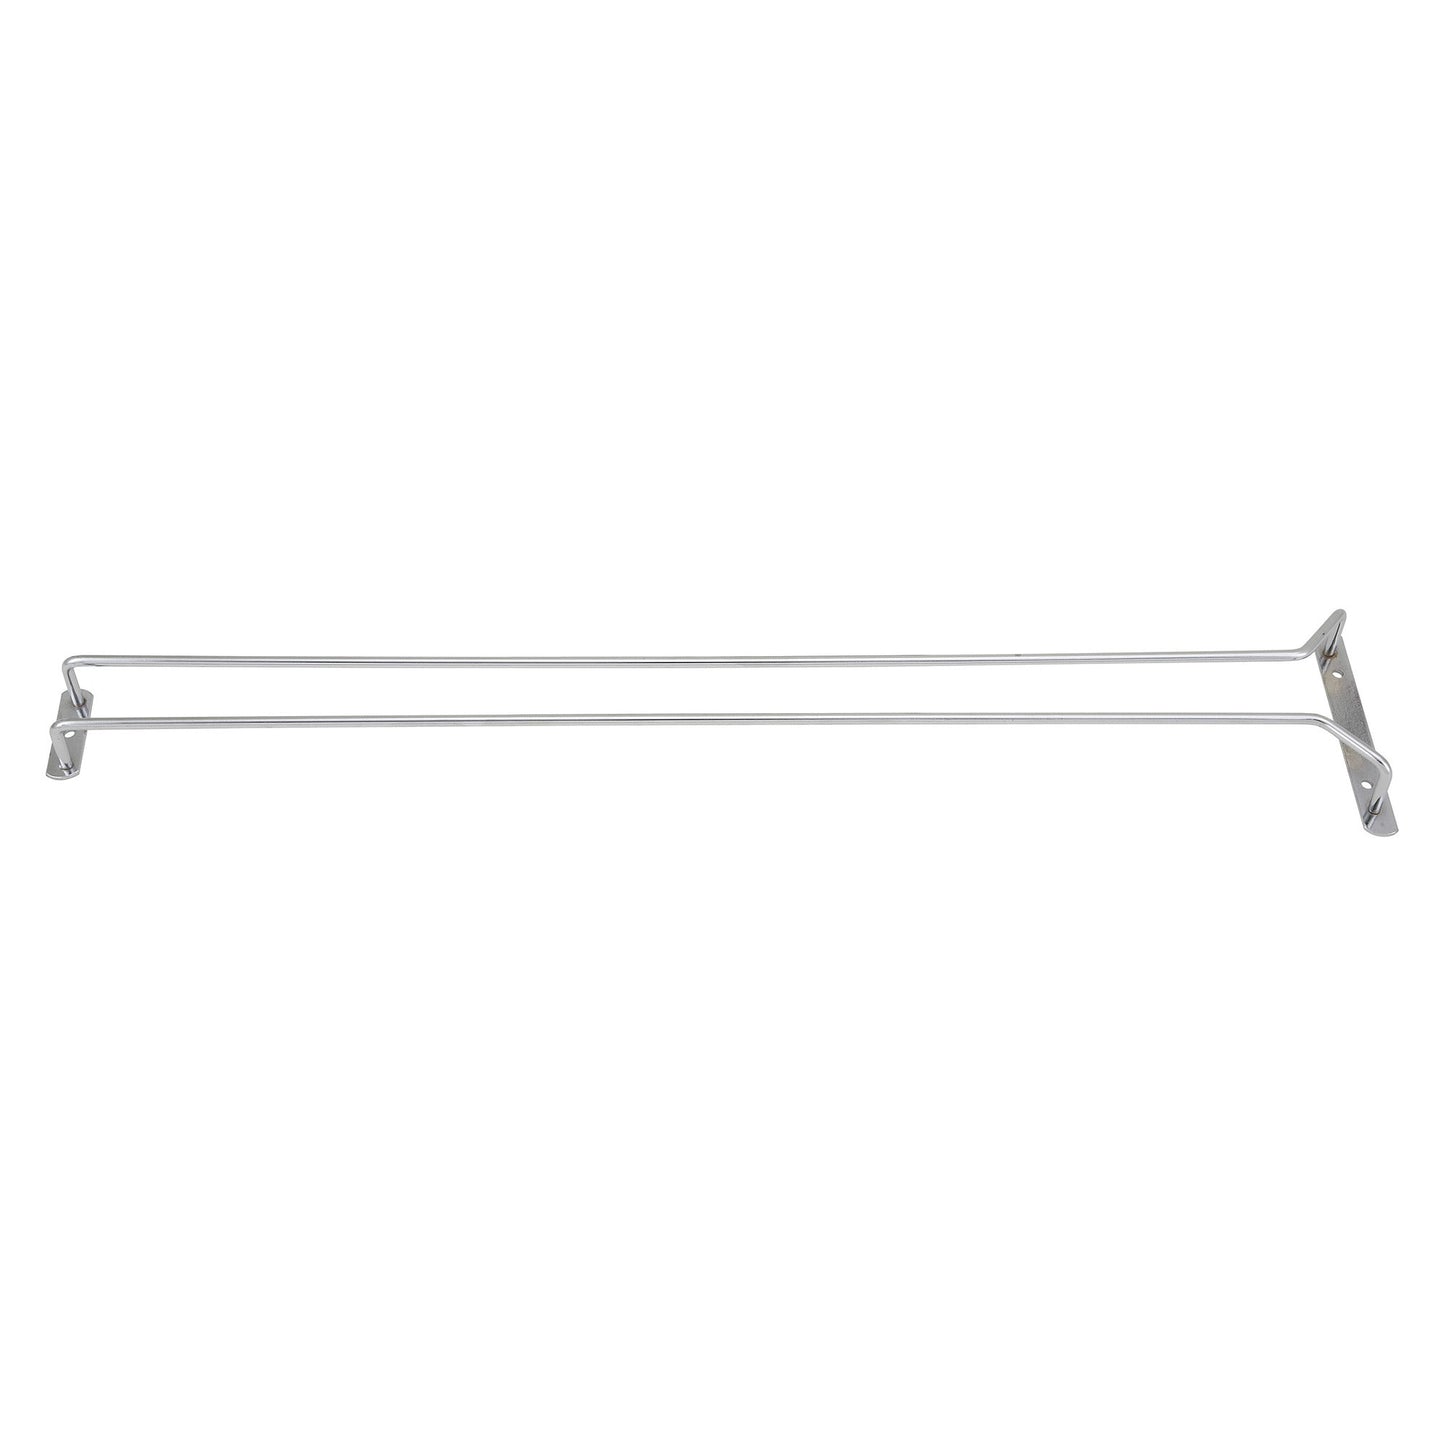 GHC-24 - 24" Wire Single Channel Glass Hanger